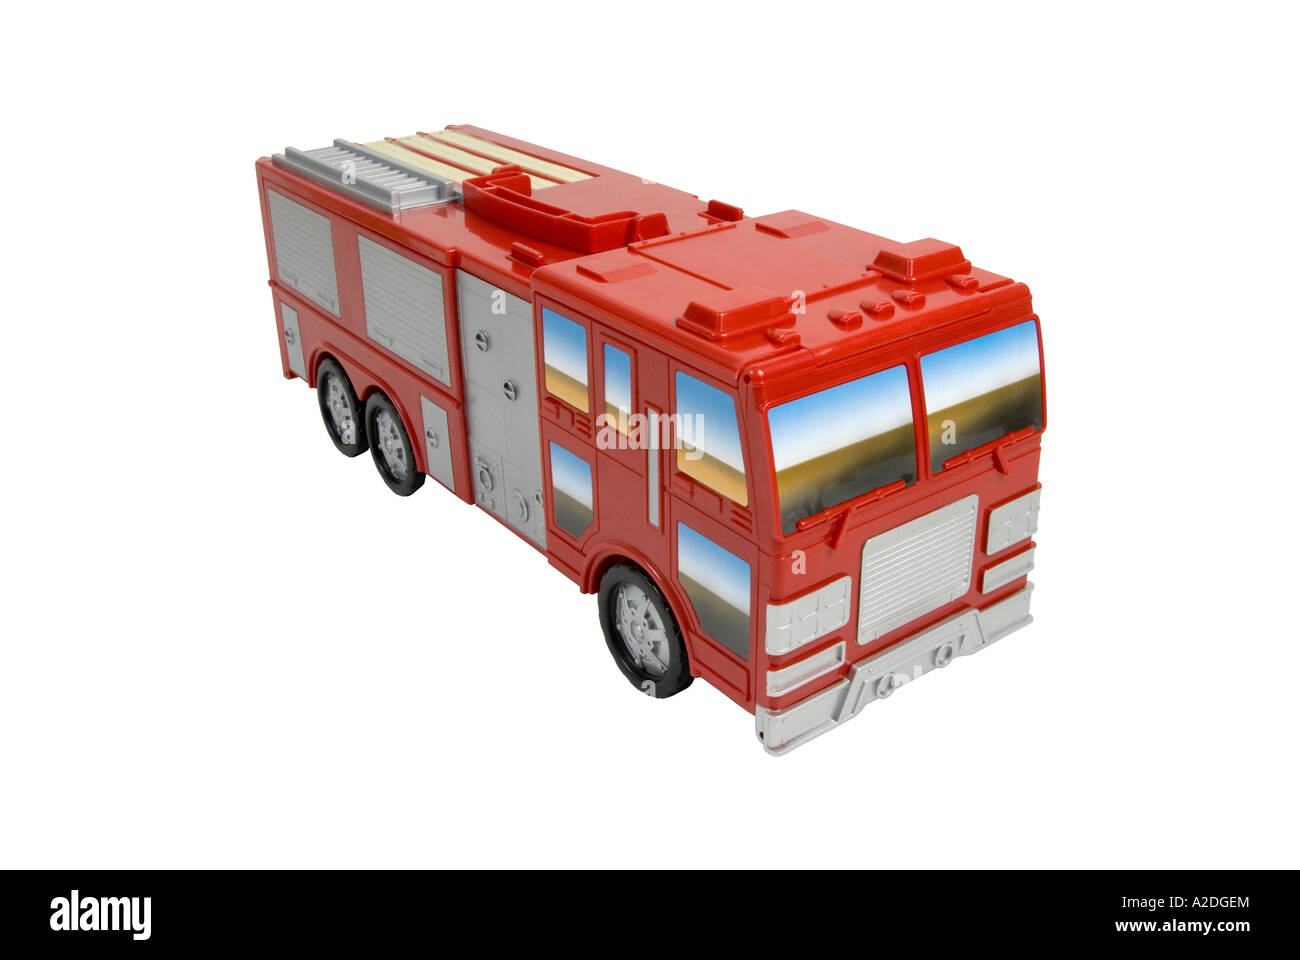 Child's toy fire engine Stock Photo